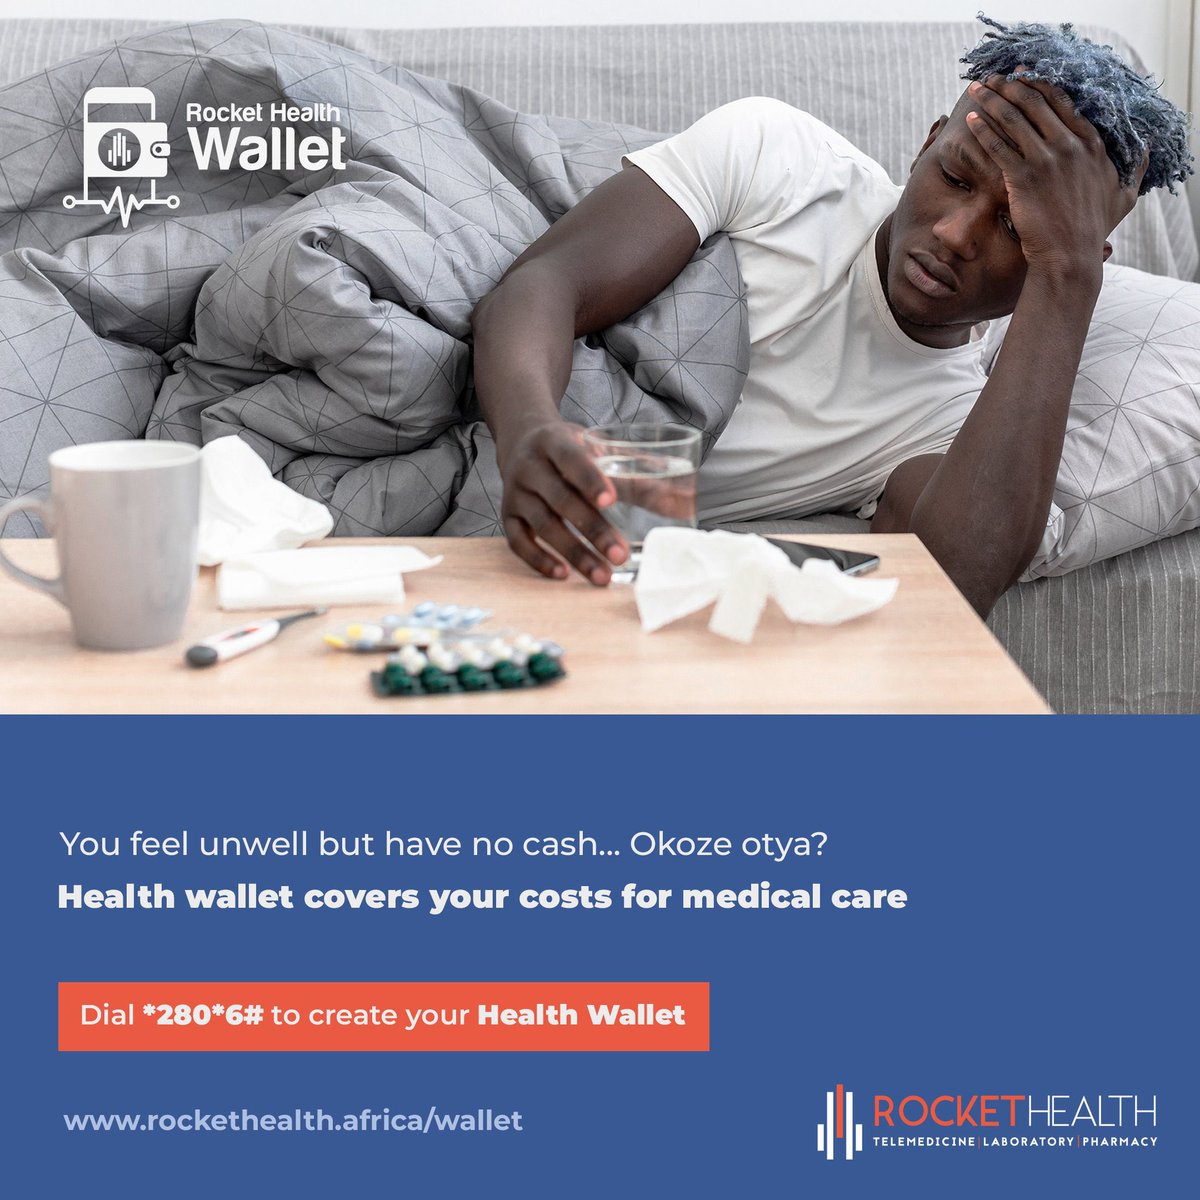 Don’t let unexpected medical bills drain your wallet 🥺 Take control and save for your health with the #RocketHealthWallet. Dial *280*6# to get started!